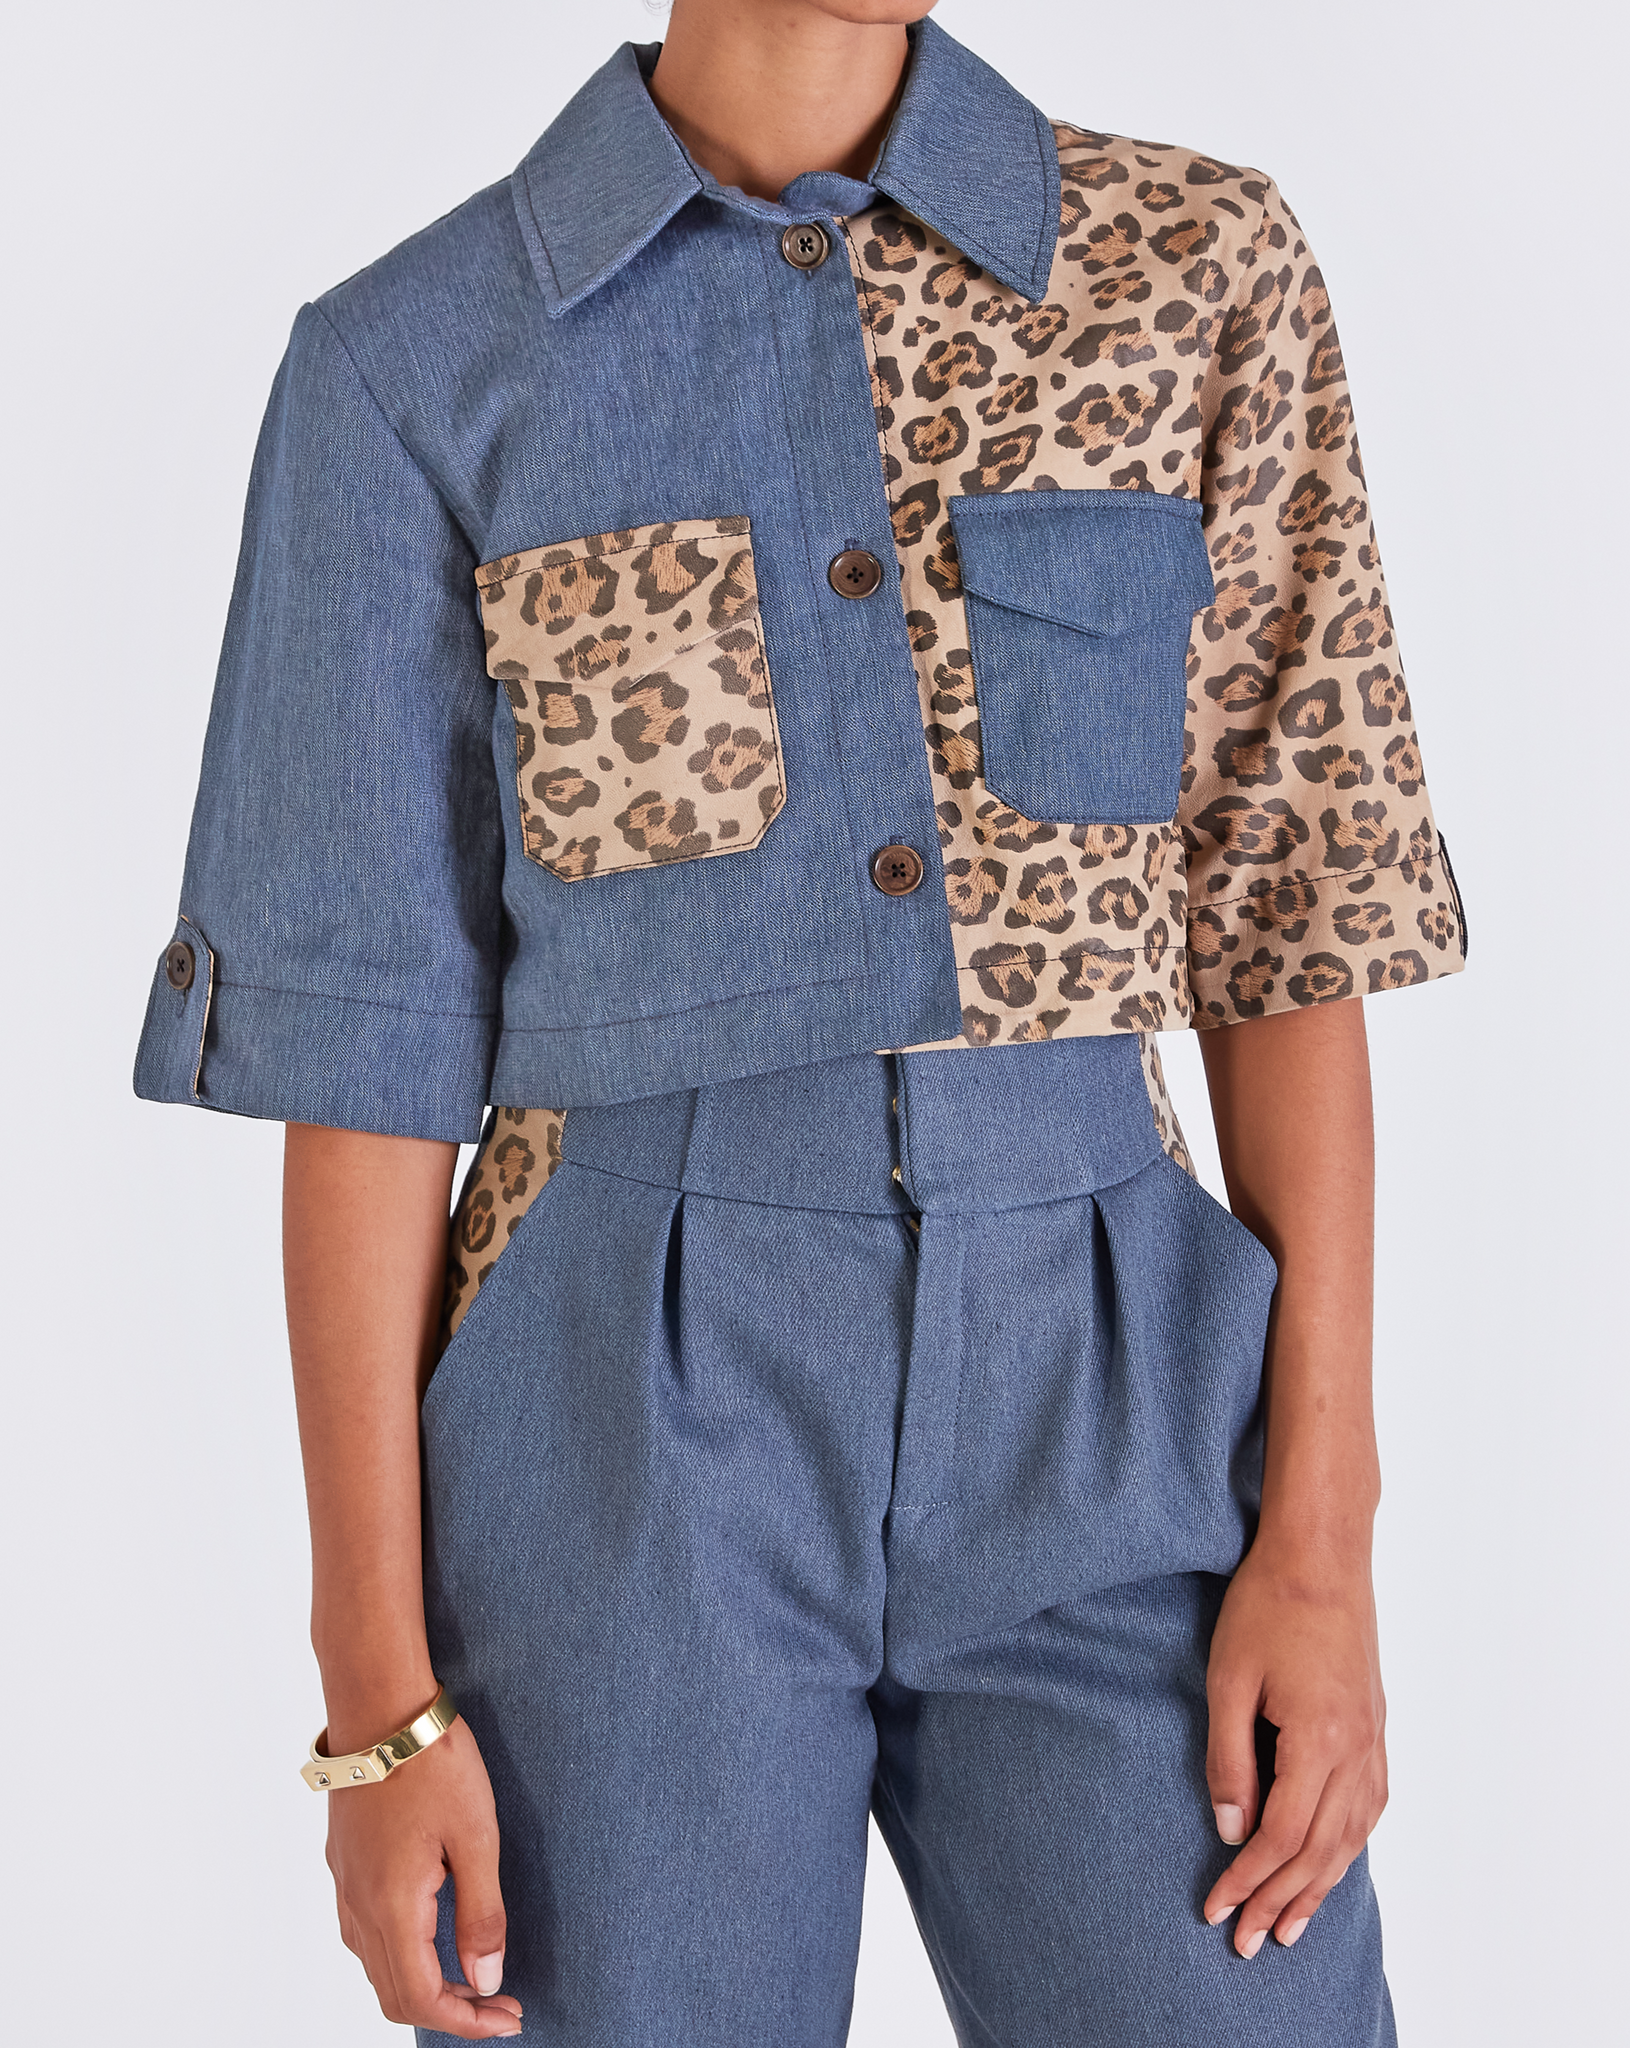 Coco CROPPED BUTTON THROUGH TOP - DENIM / LEATHER